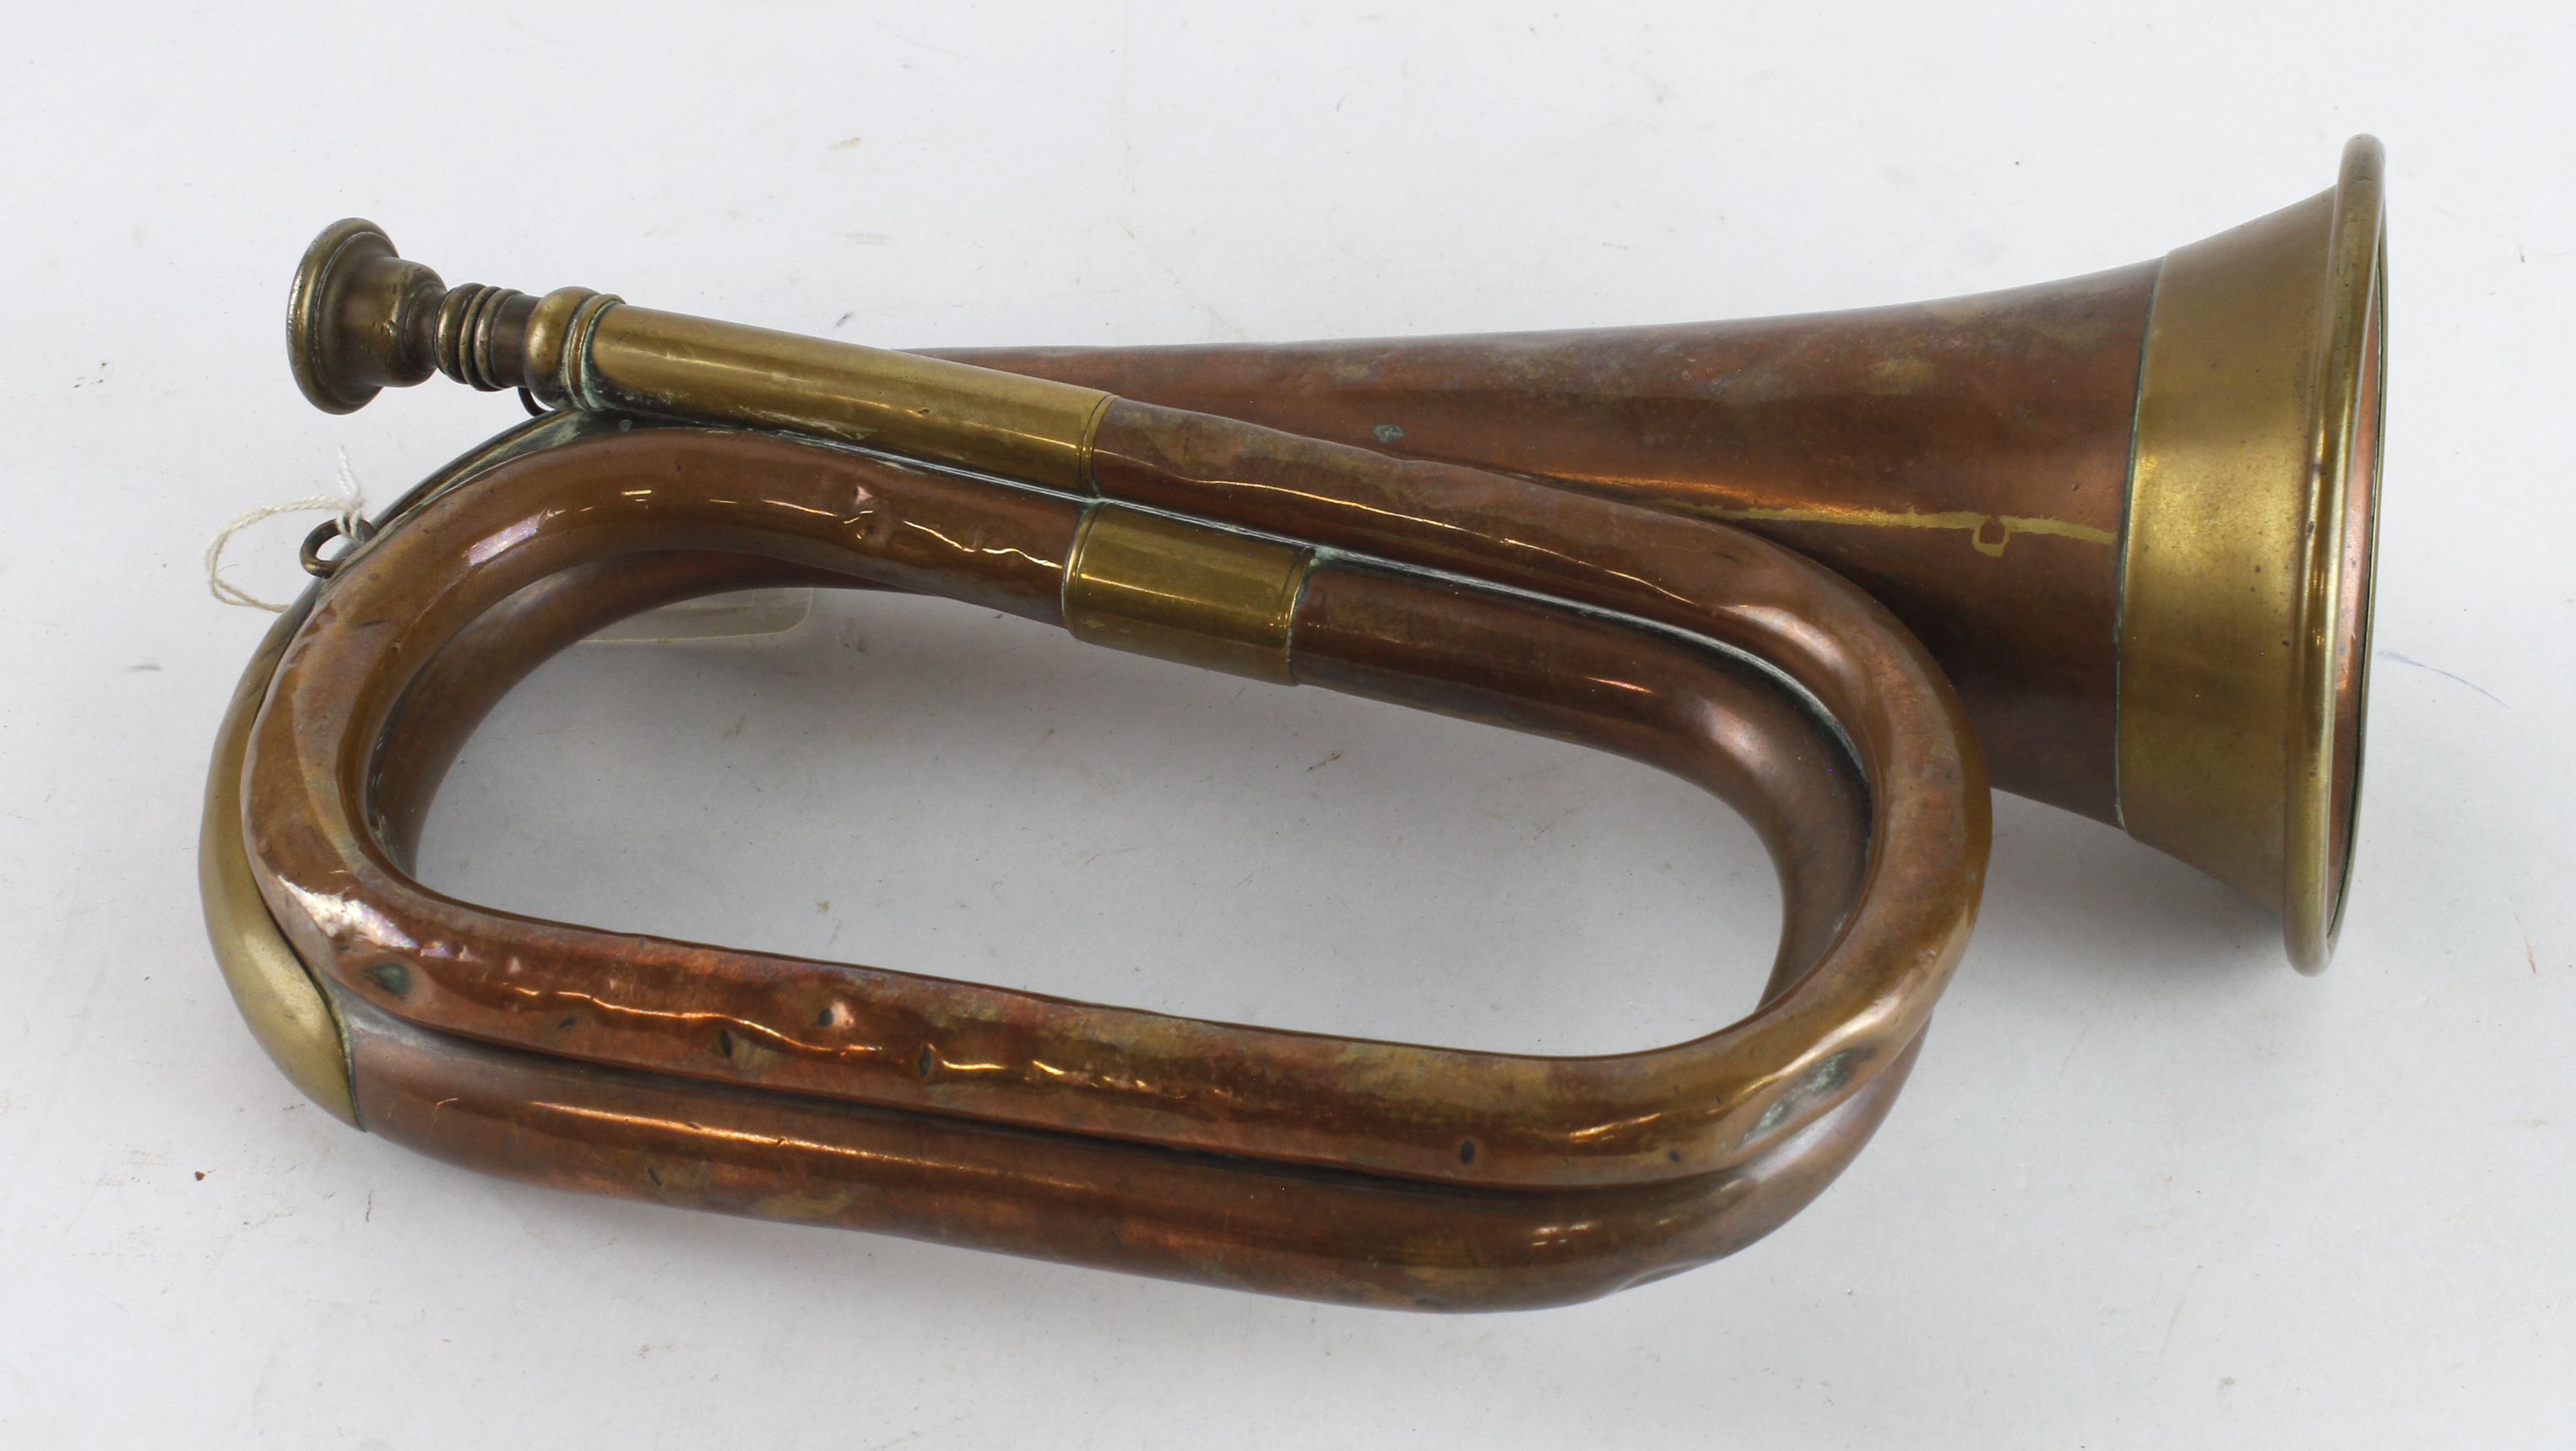 WW1 1917 dated bugle by Hawkes & Son London nice example.